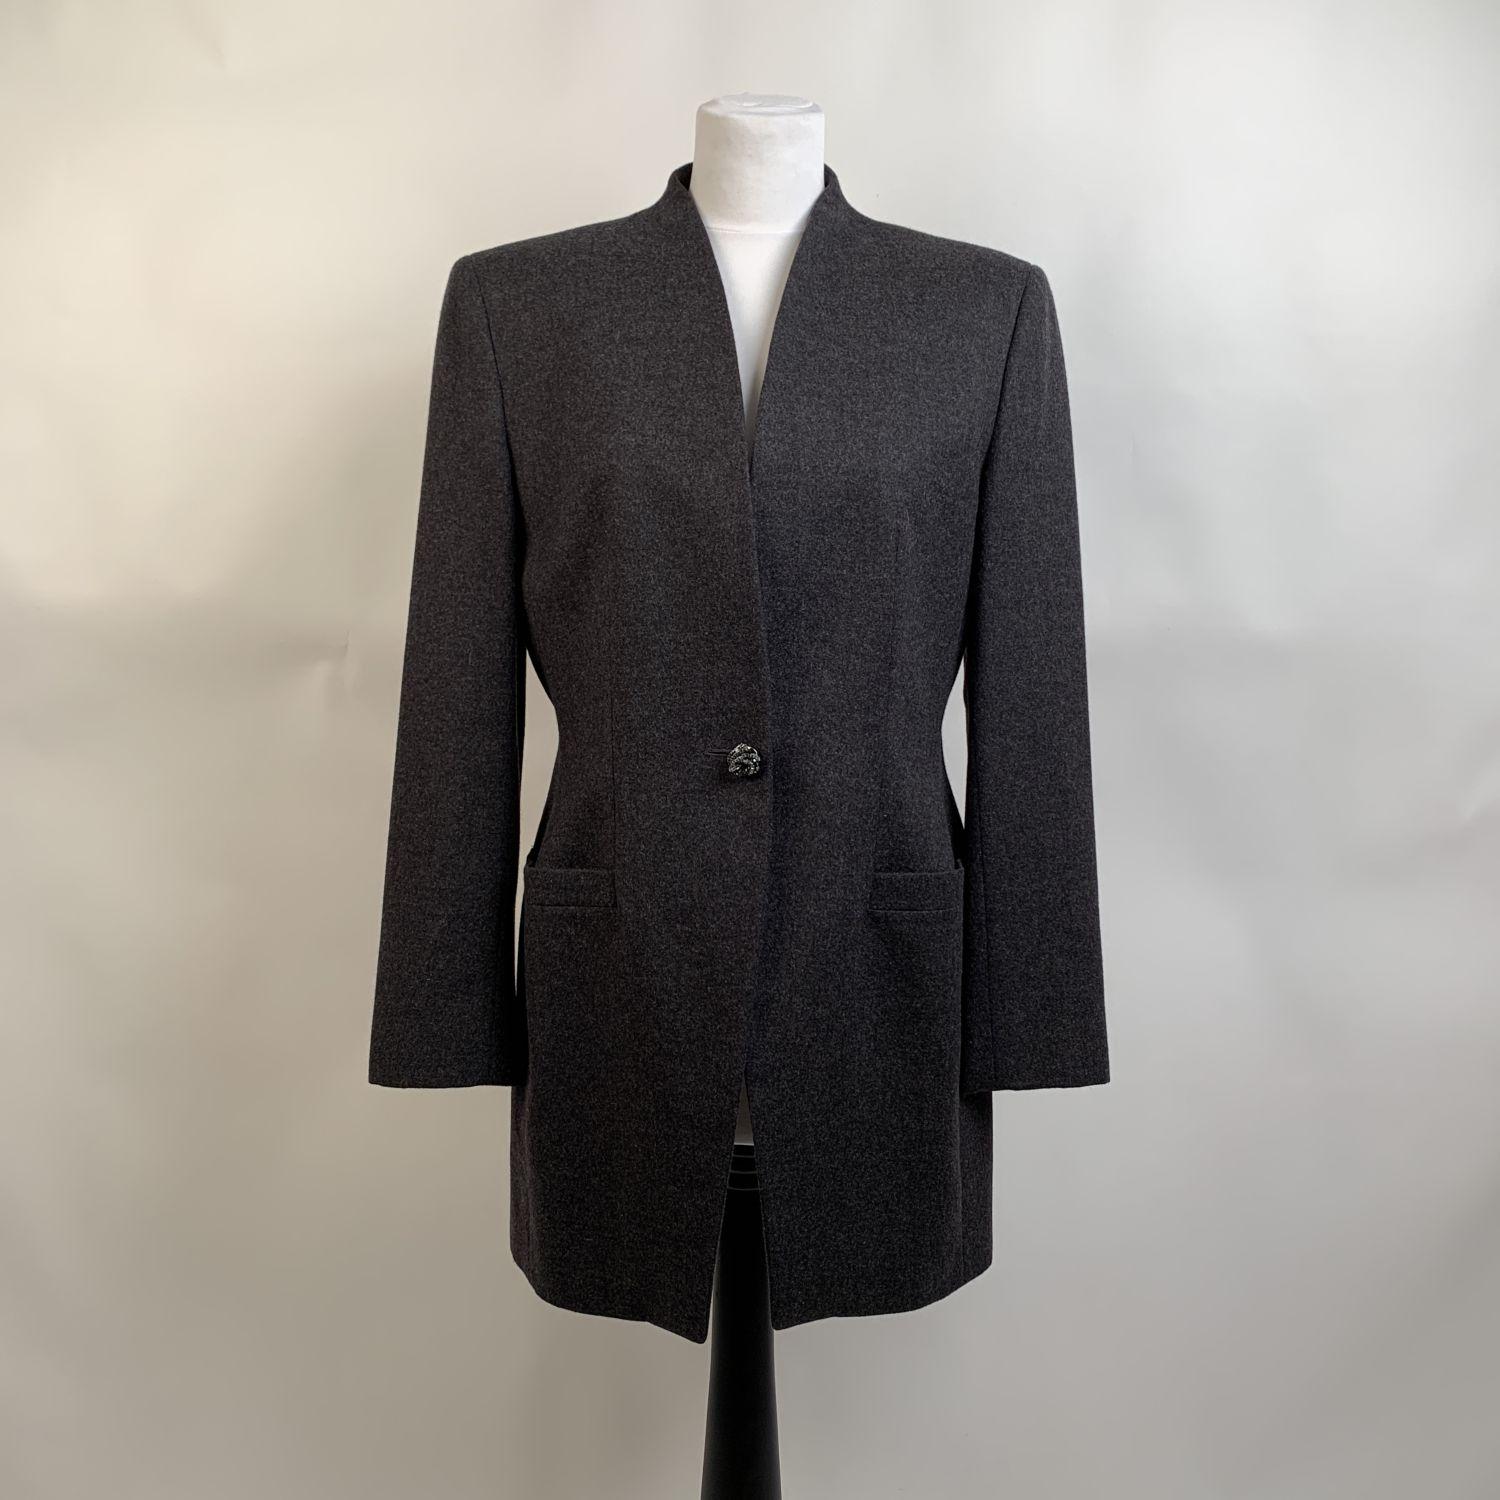 Les Copains Vintage gray wool and cashmere blazer. It features single button closure, beaded buttons, 2 pockets on the hips and a longline cut. Lined. Composition: 80% Wool, 20% Cashmere. Size: 42 IT. It should correspond to a SMALL